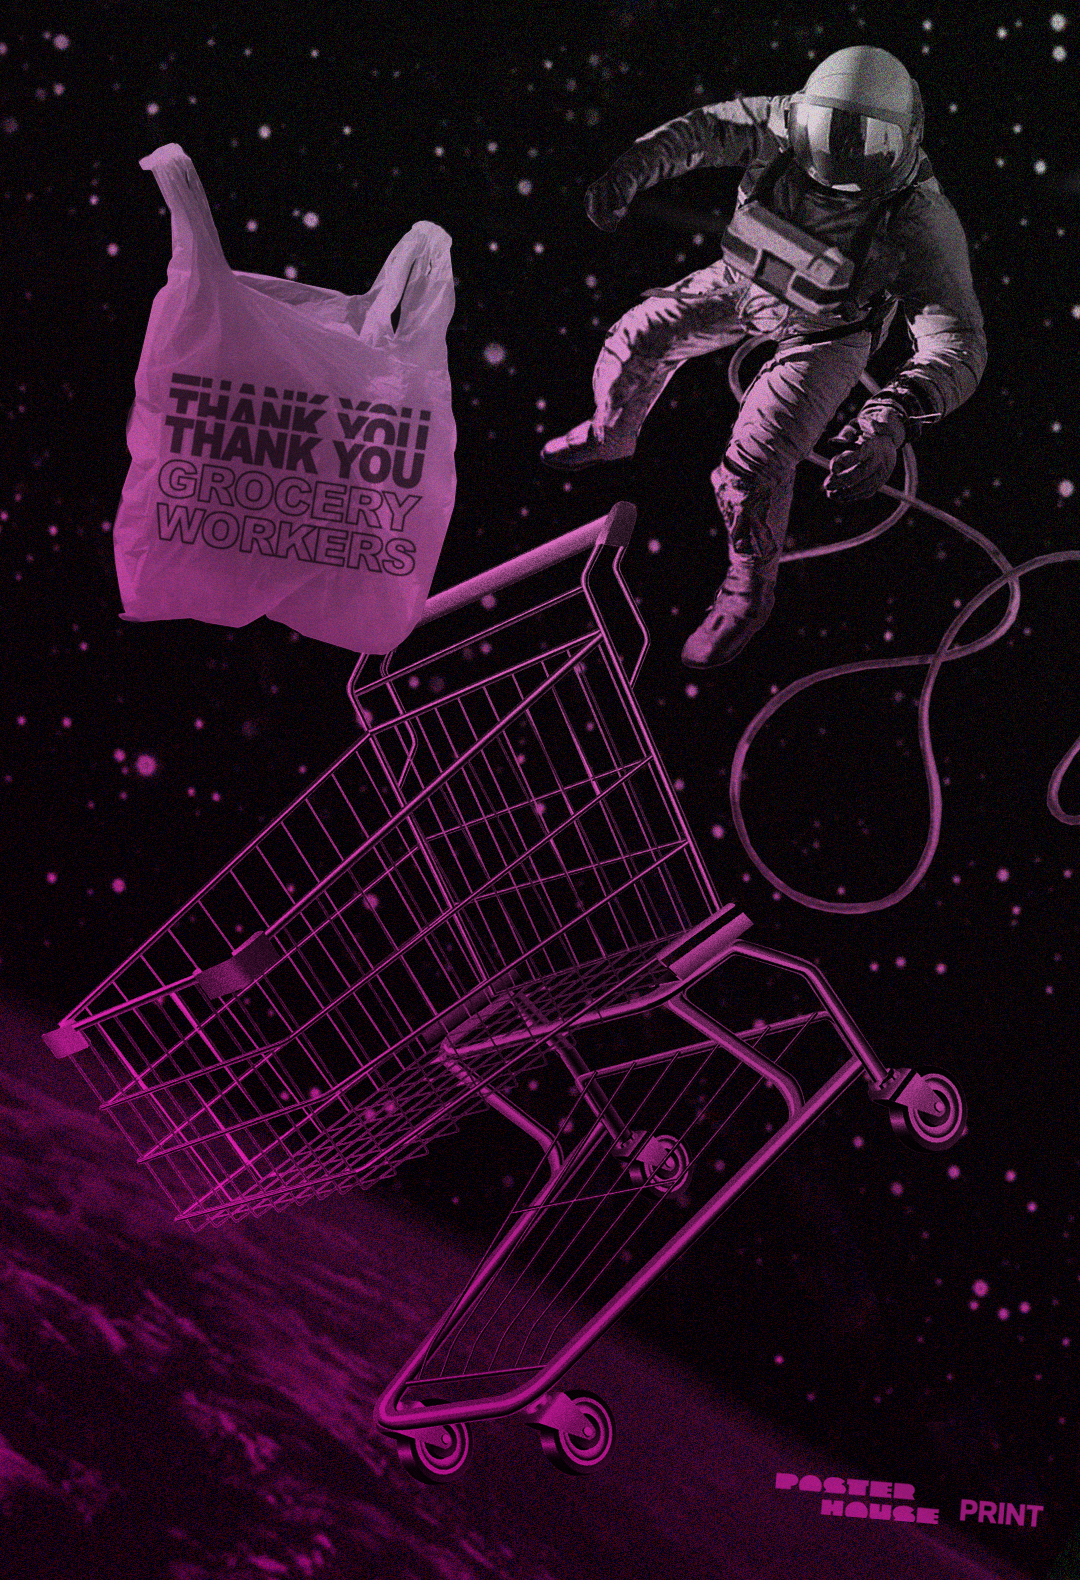 photomontage poster of a shopping cart shopping bag and astronaut floating in space